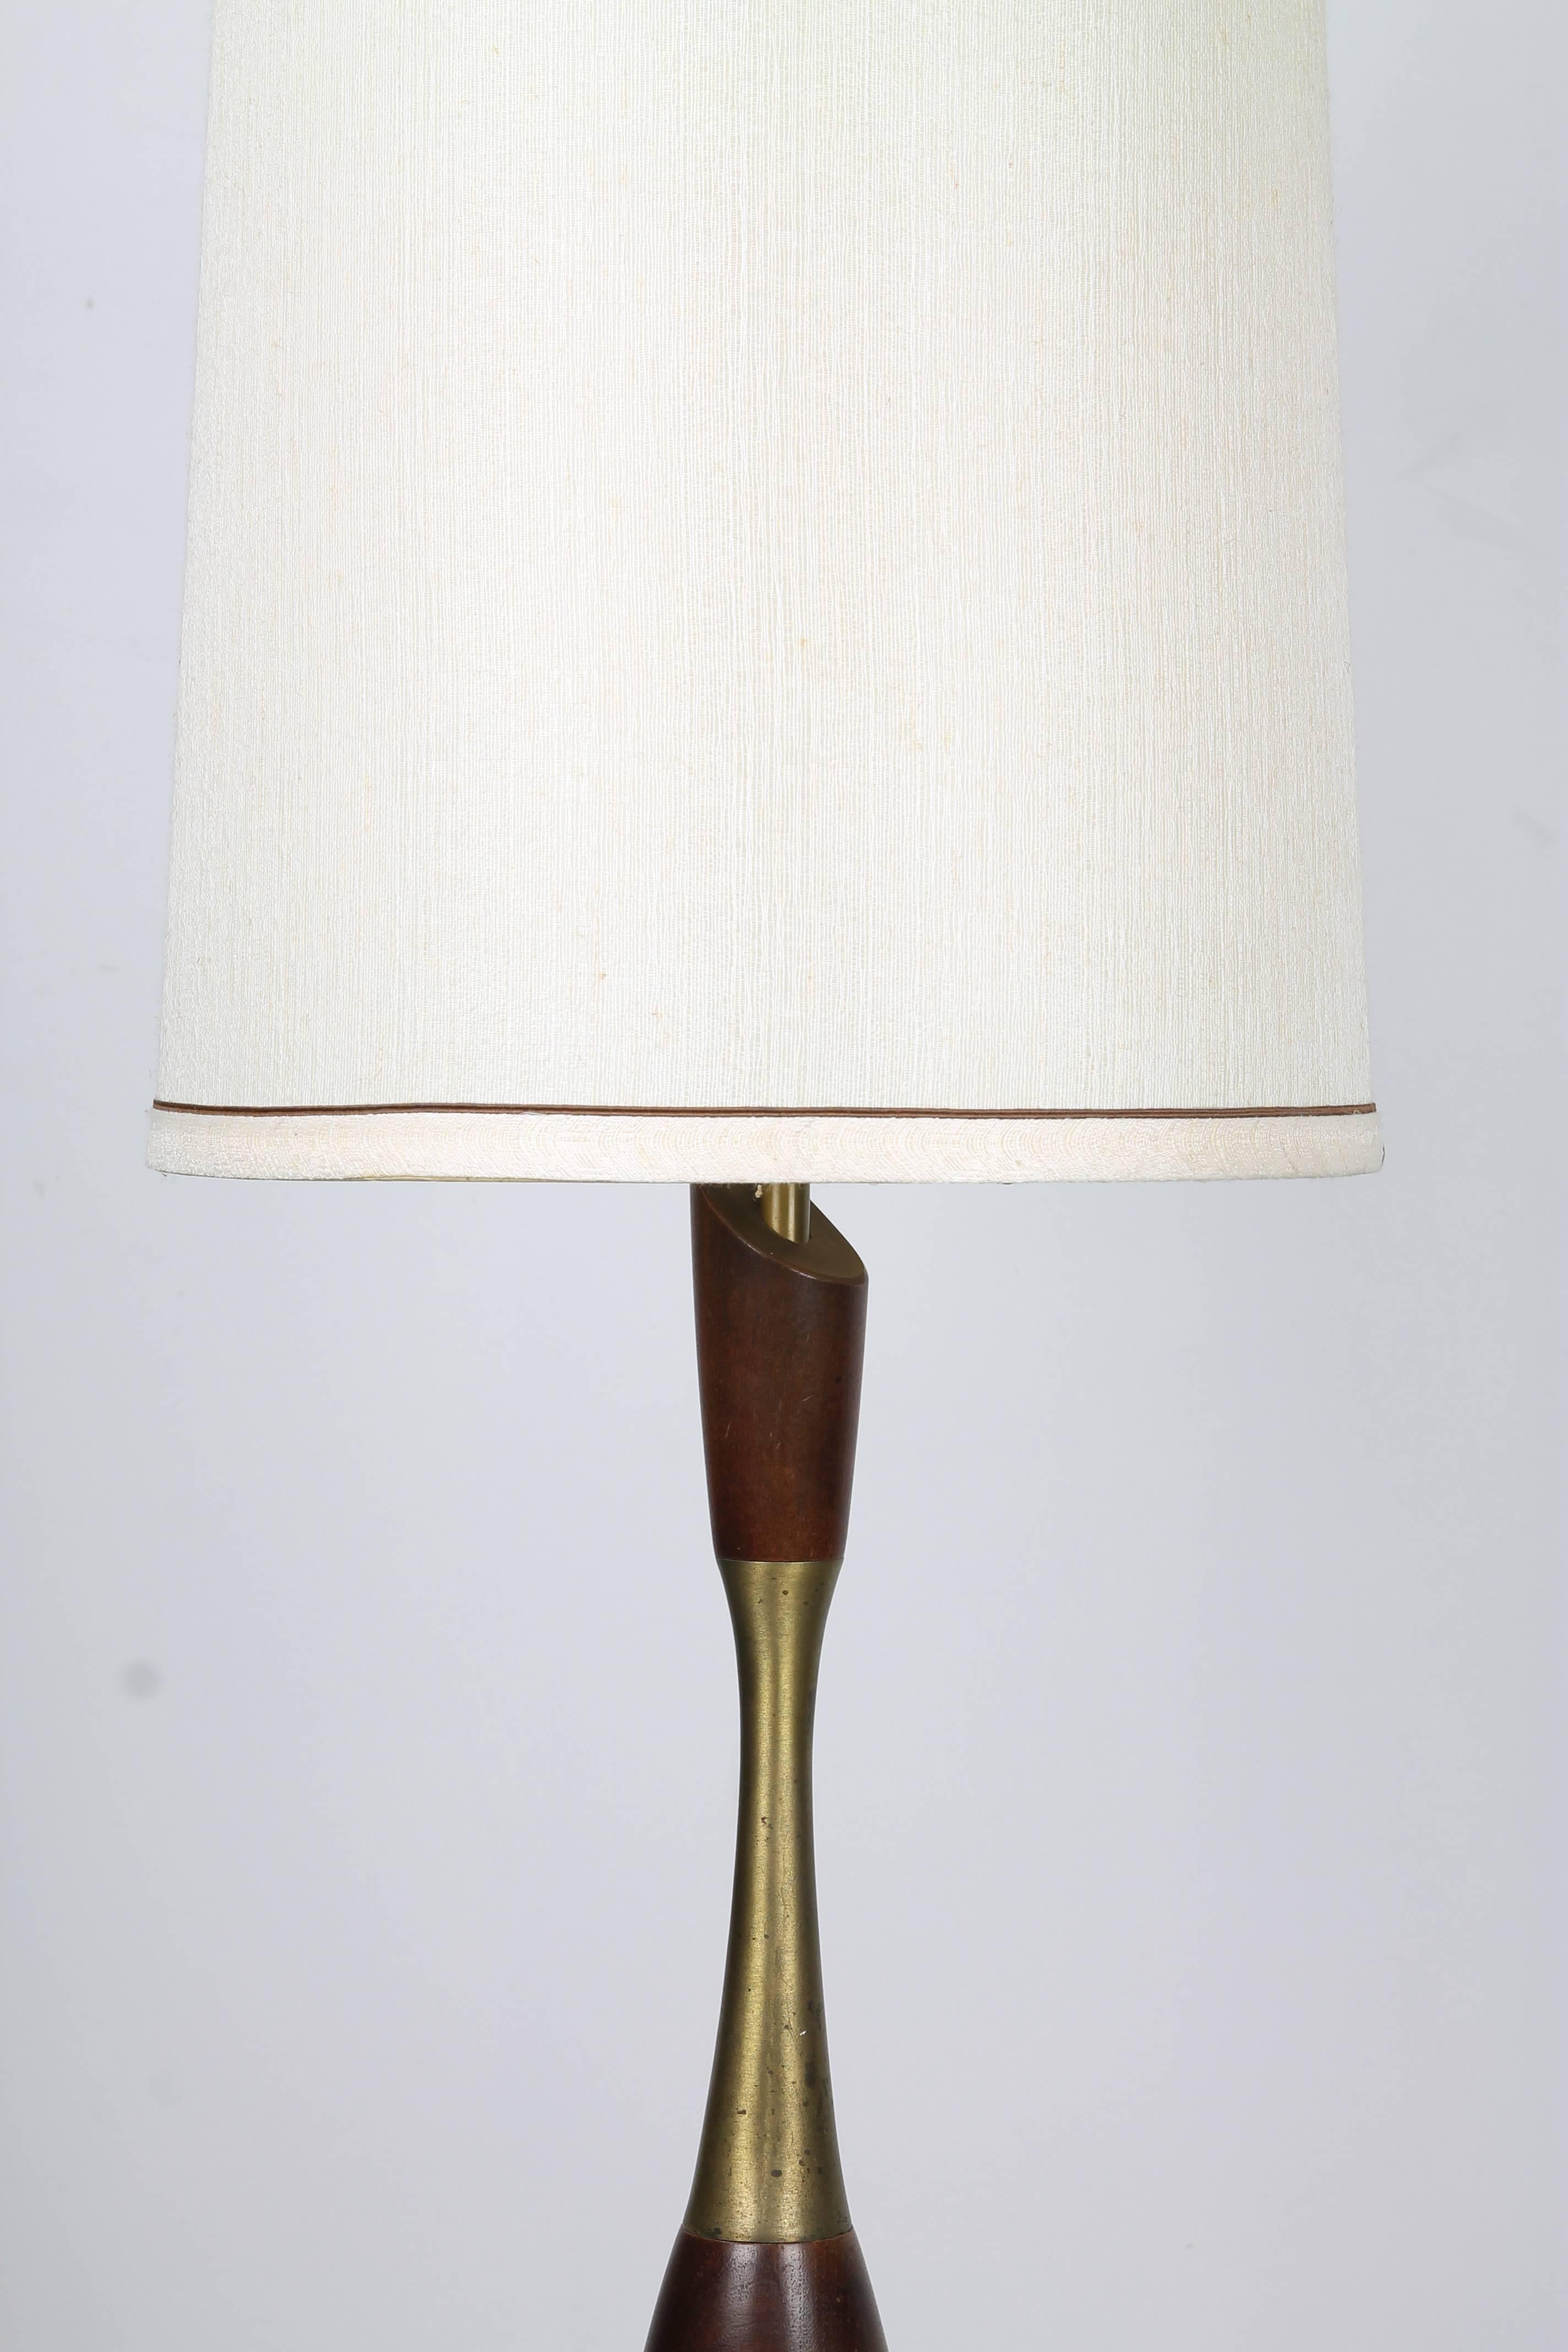 A organic-form Tony Paul table lamp of turned walnut and brass elements, with tall cylindrical off-white shade.